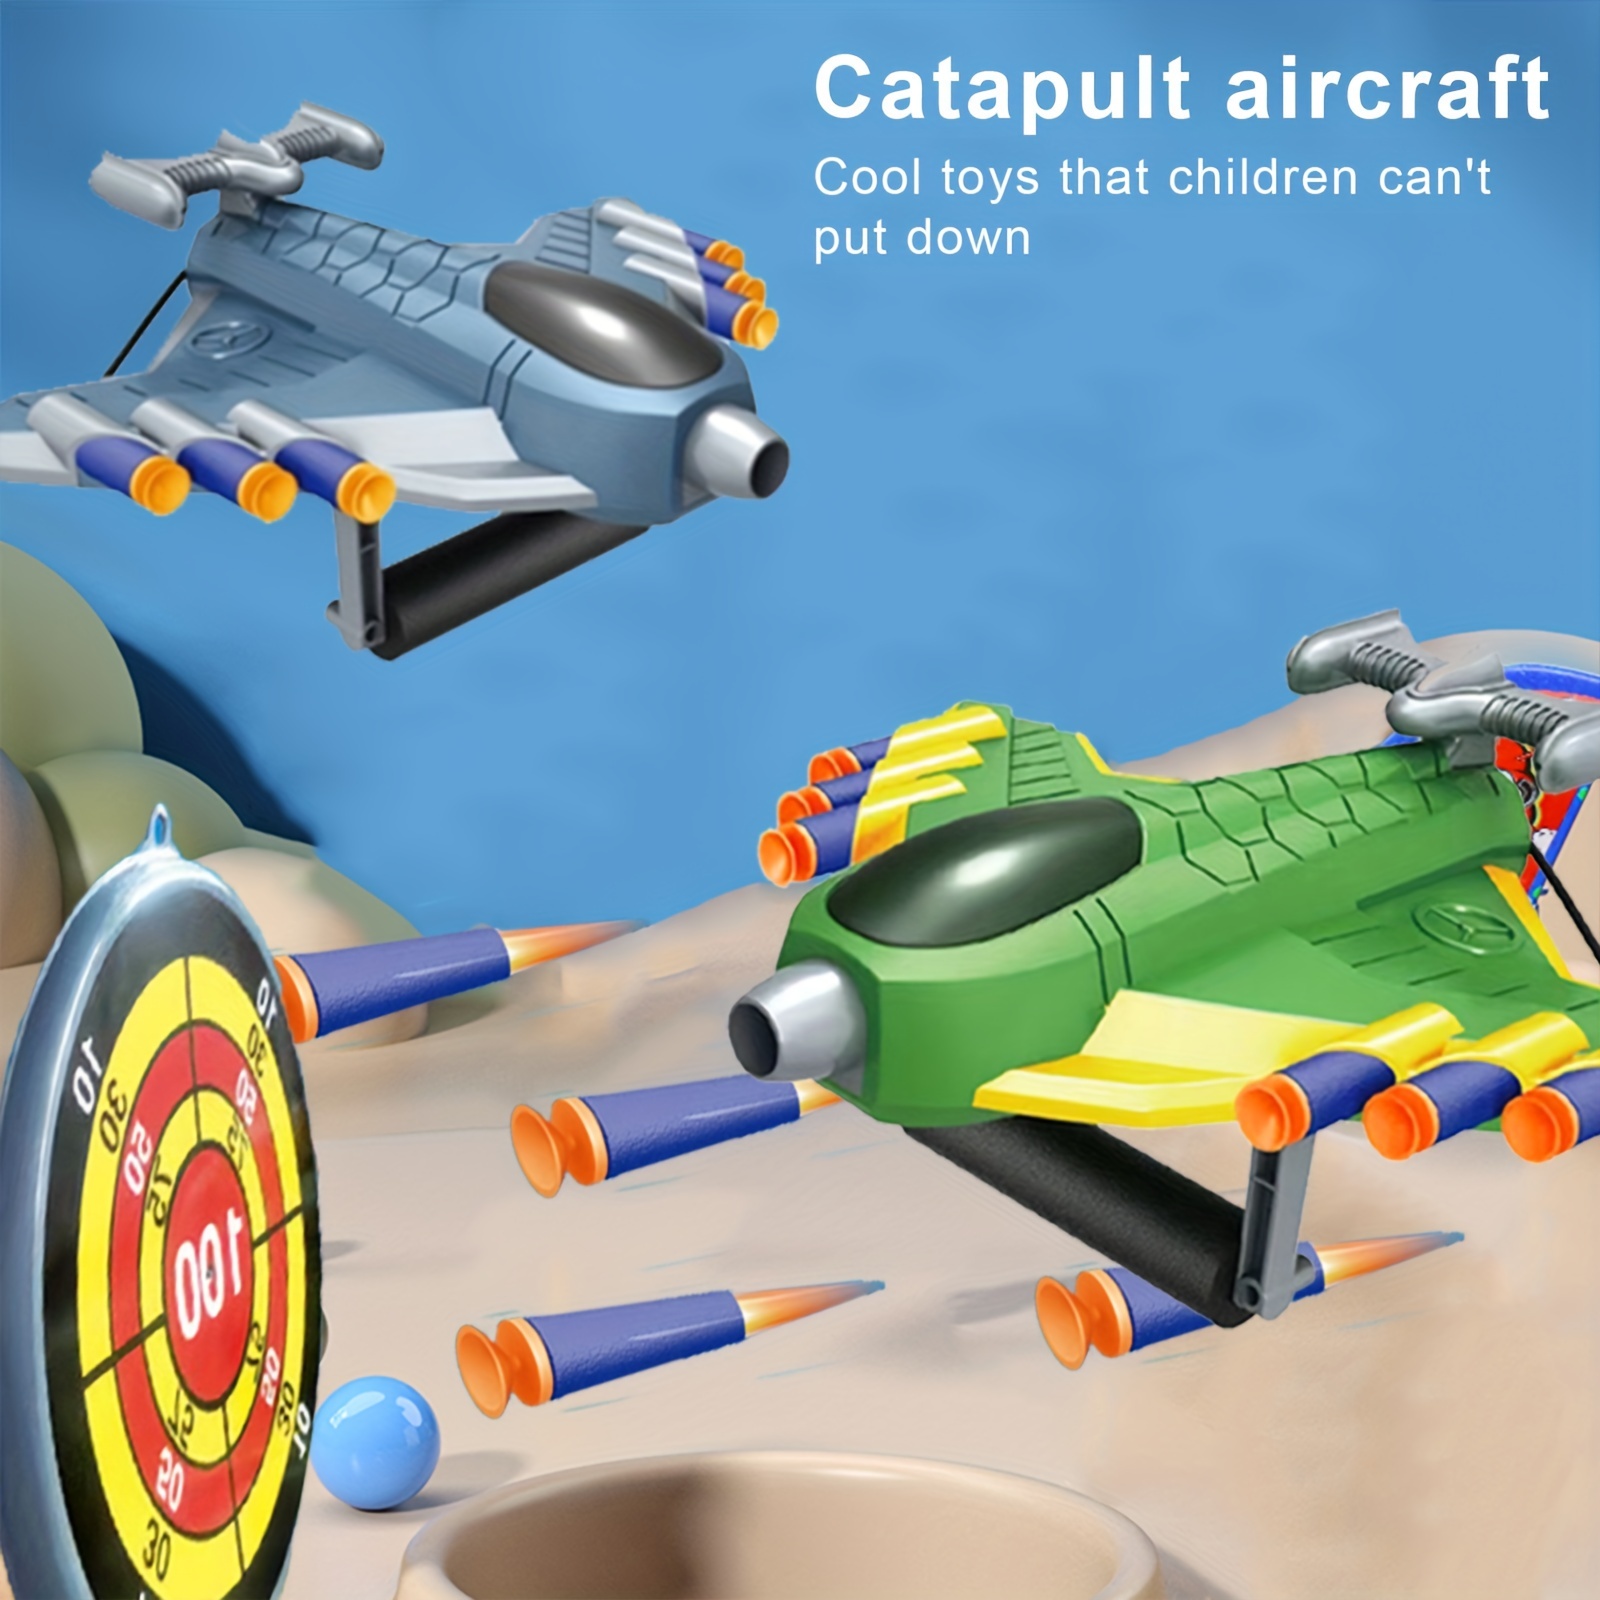 Can someone explain what the catapult vests are that all the jets